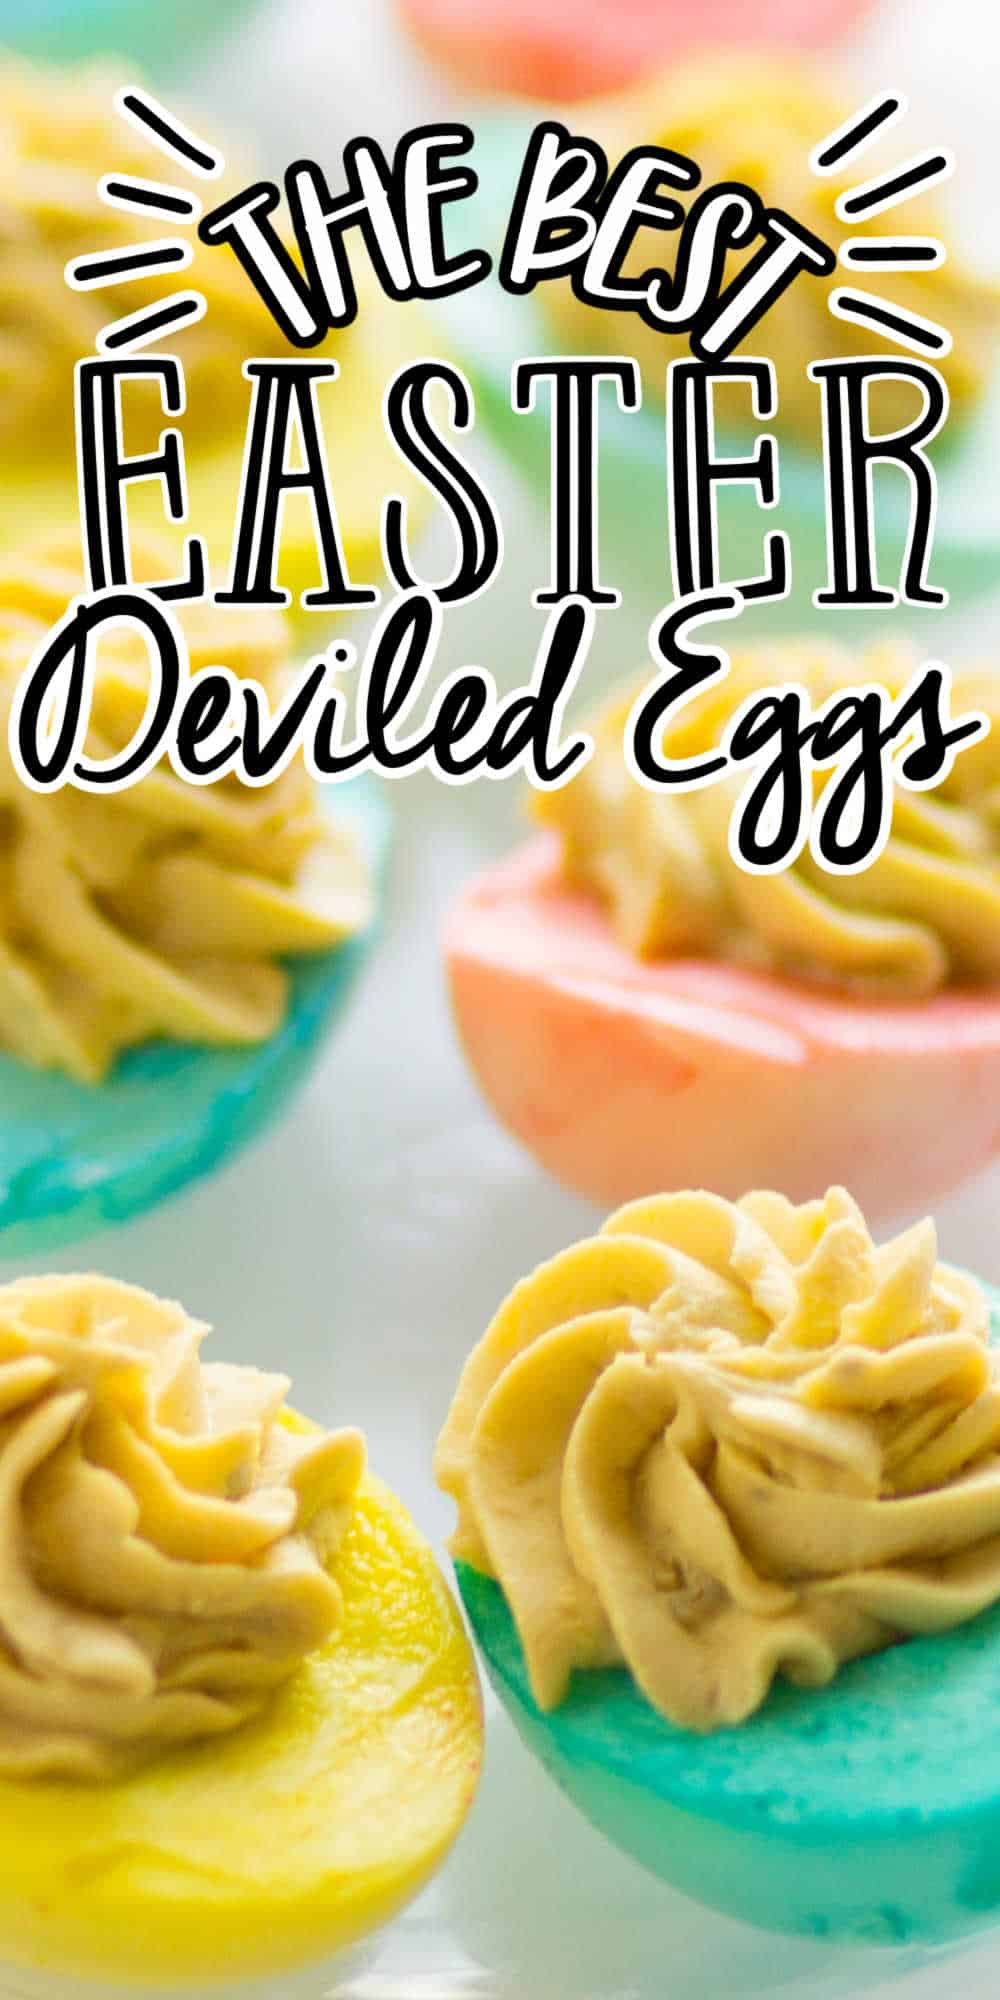 Pastel Deviled Eggs Recipe (Perfect for Easter!)